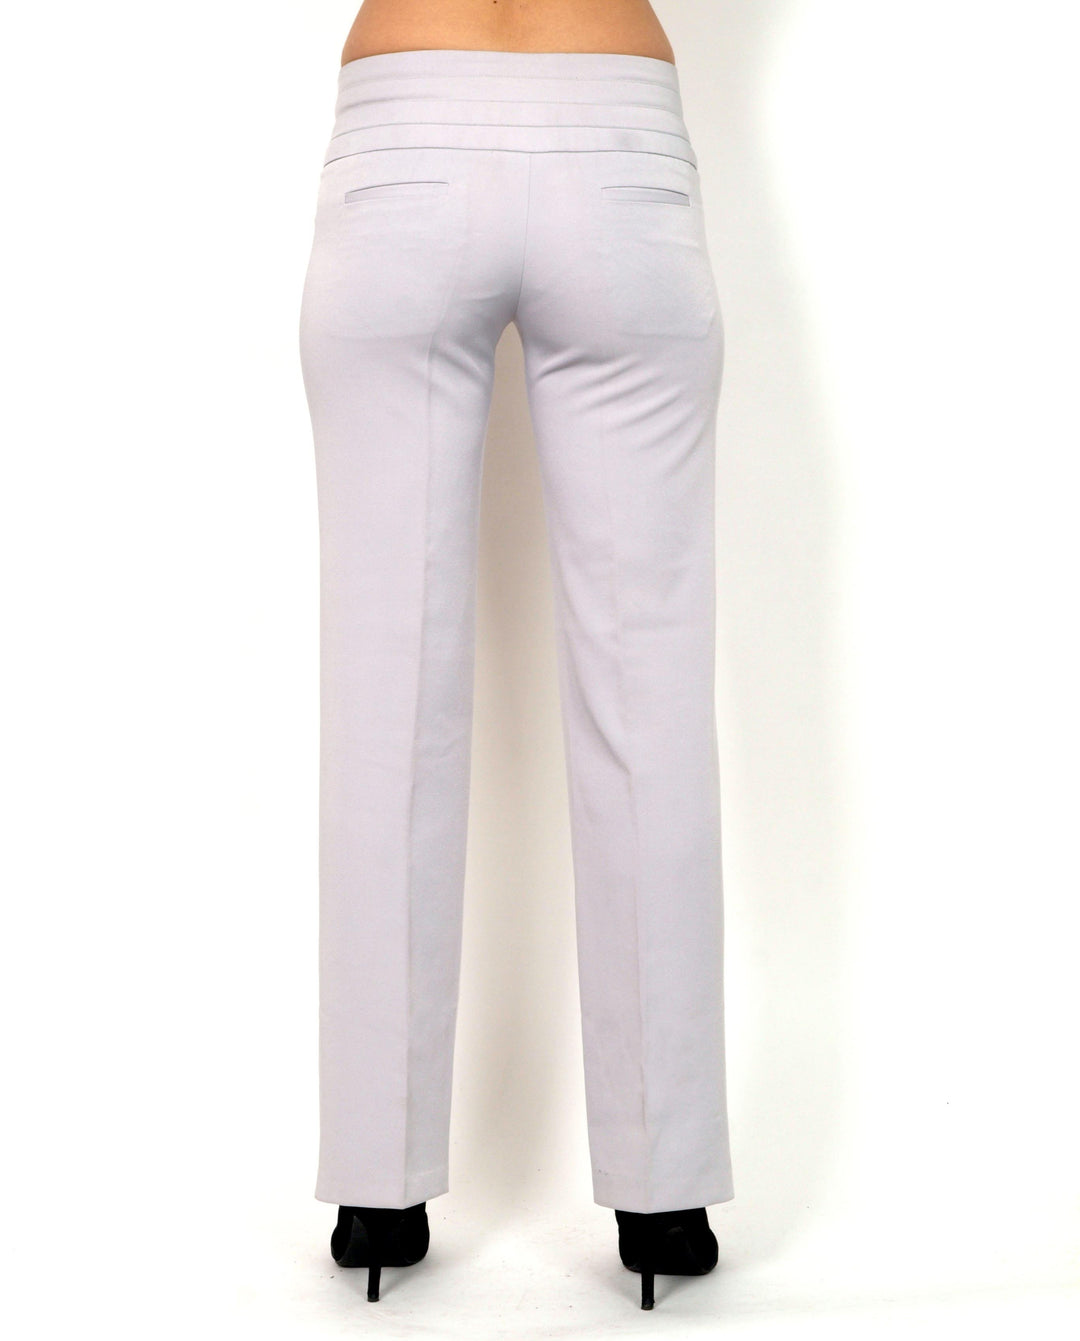 Gray long pants with a straight cut